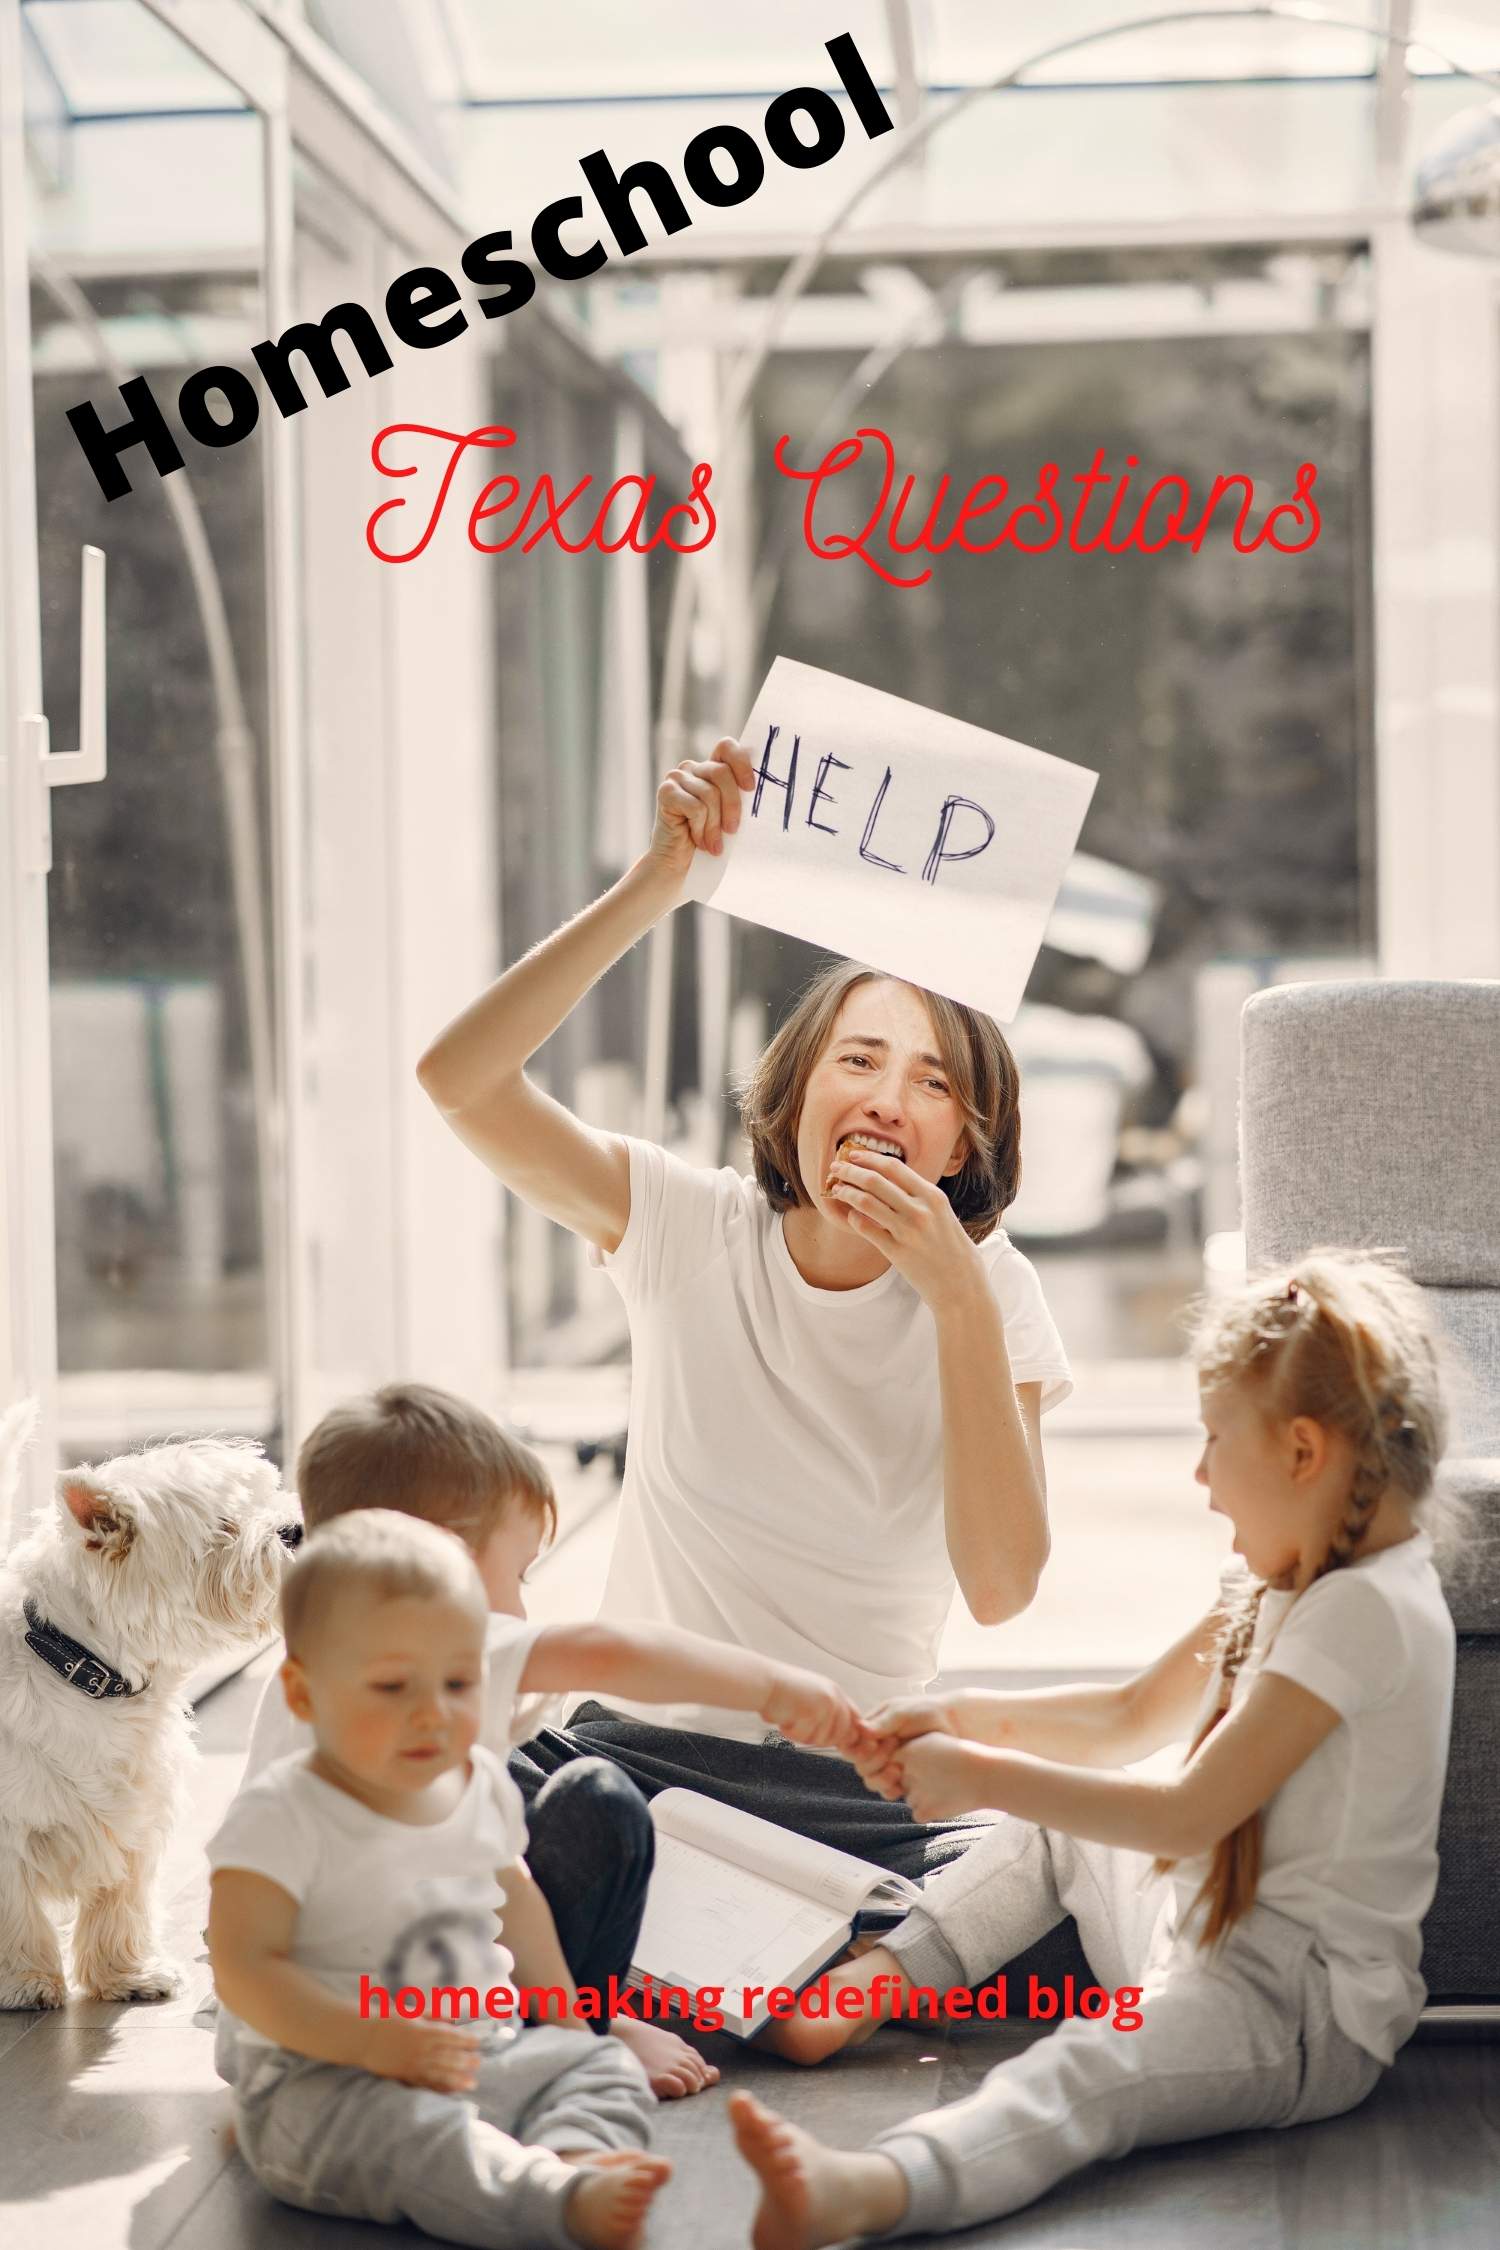 how-to-homeschool-in-texas-homemaking-redefined